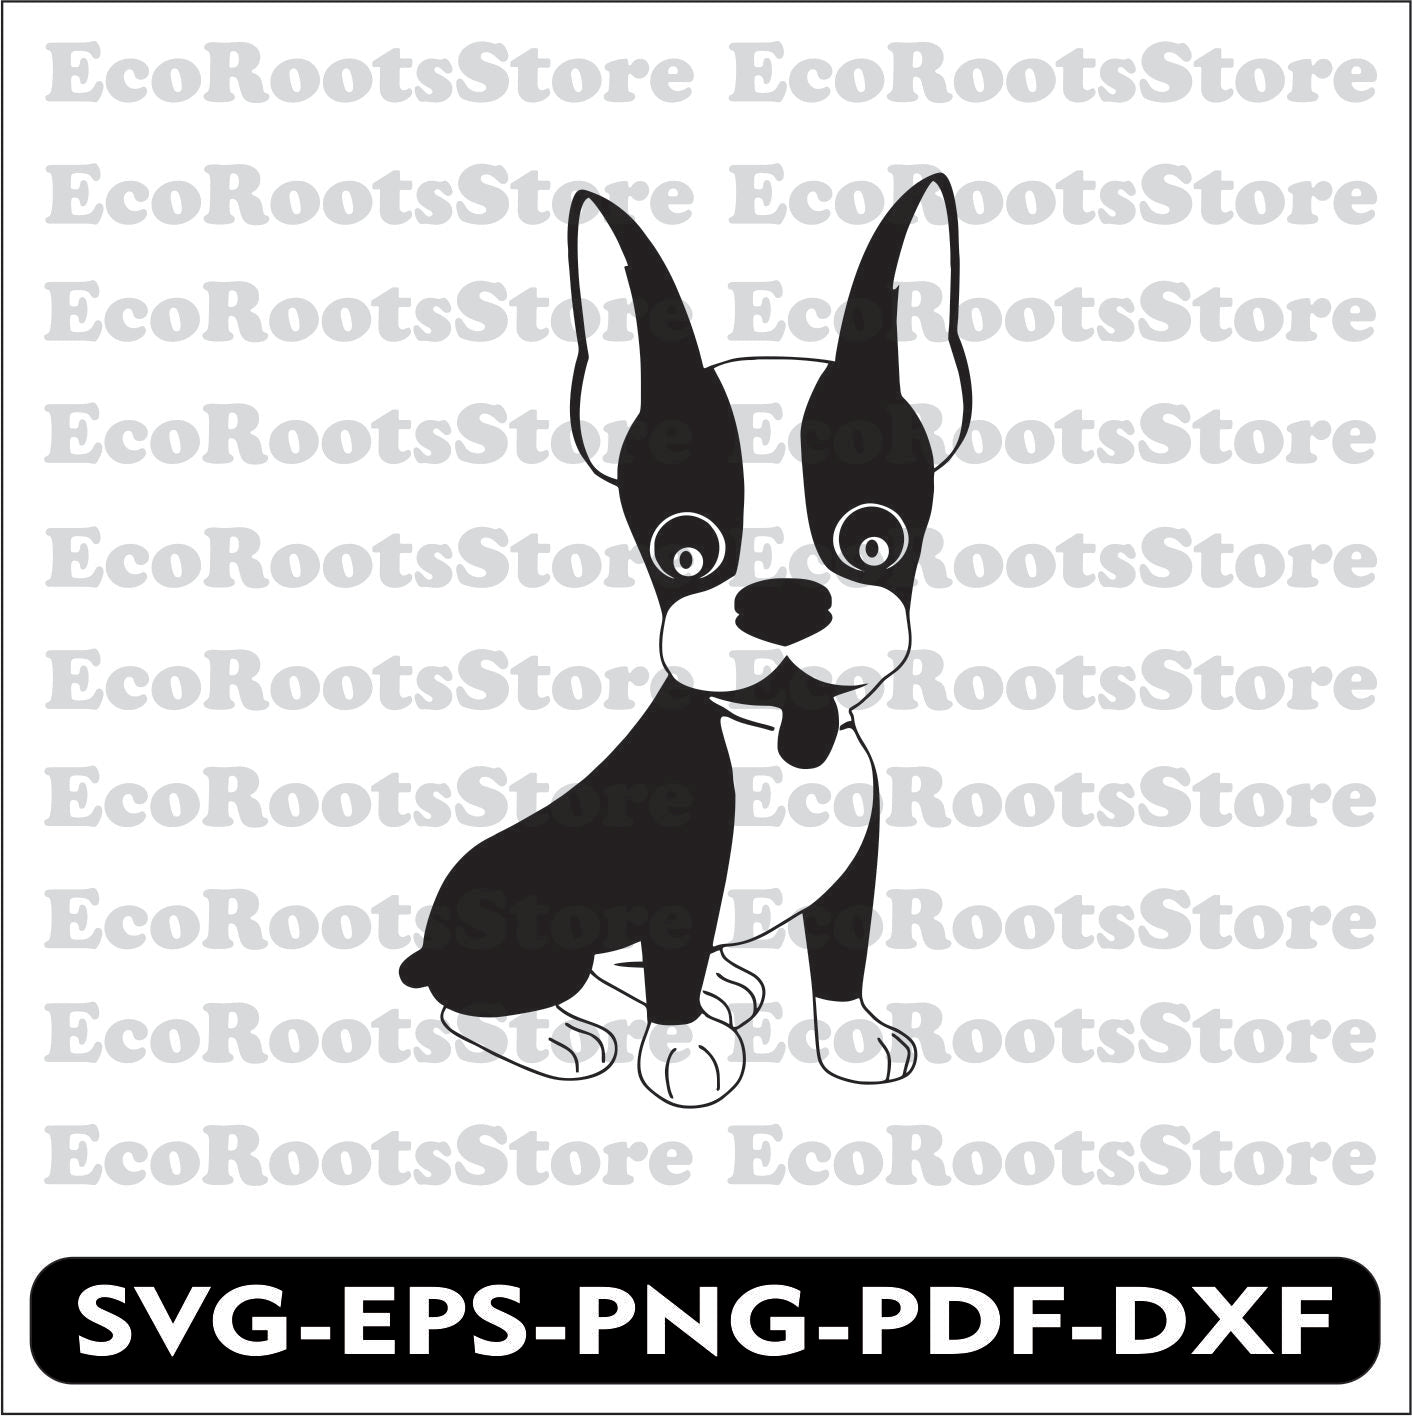 Boston Terrier Dog SVG EPS PNG PDF DXF Cutting File